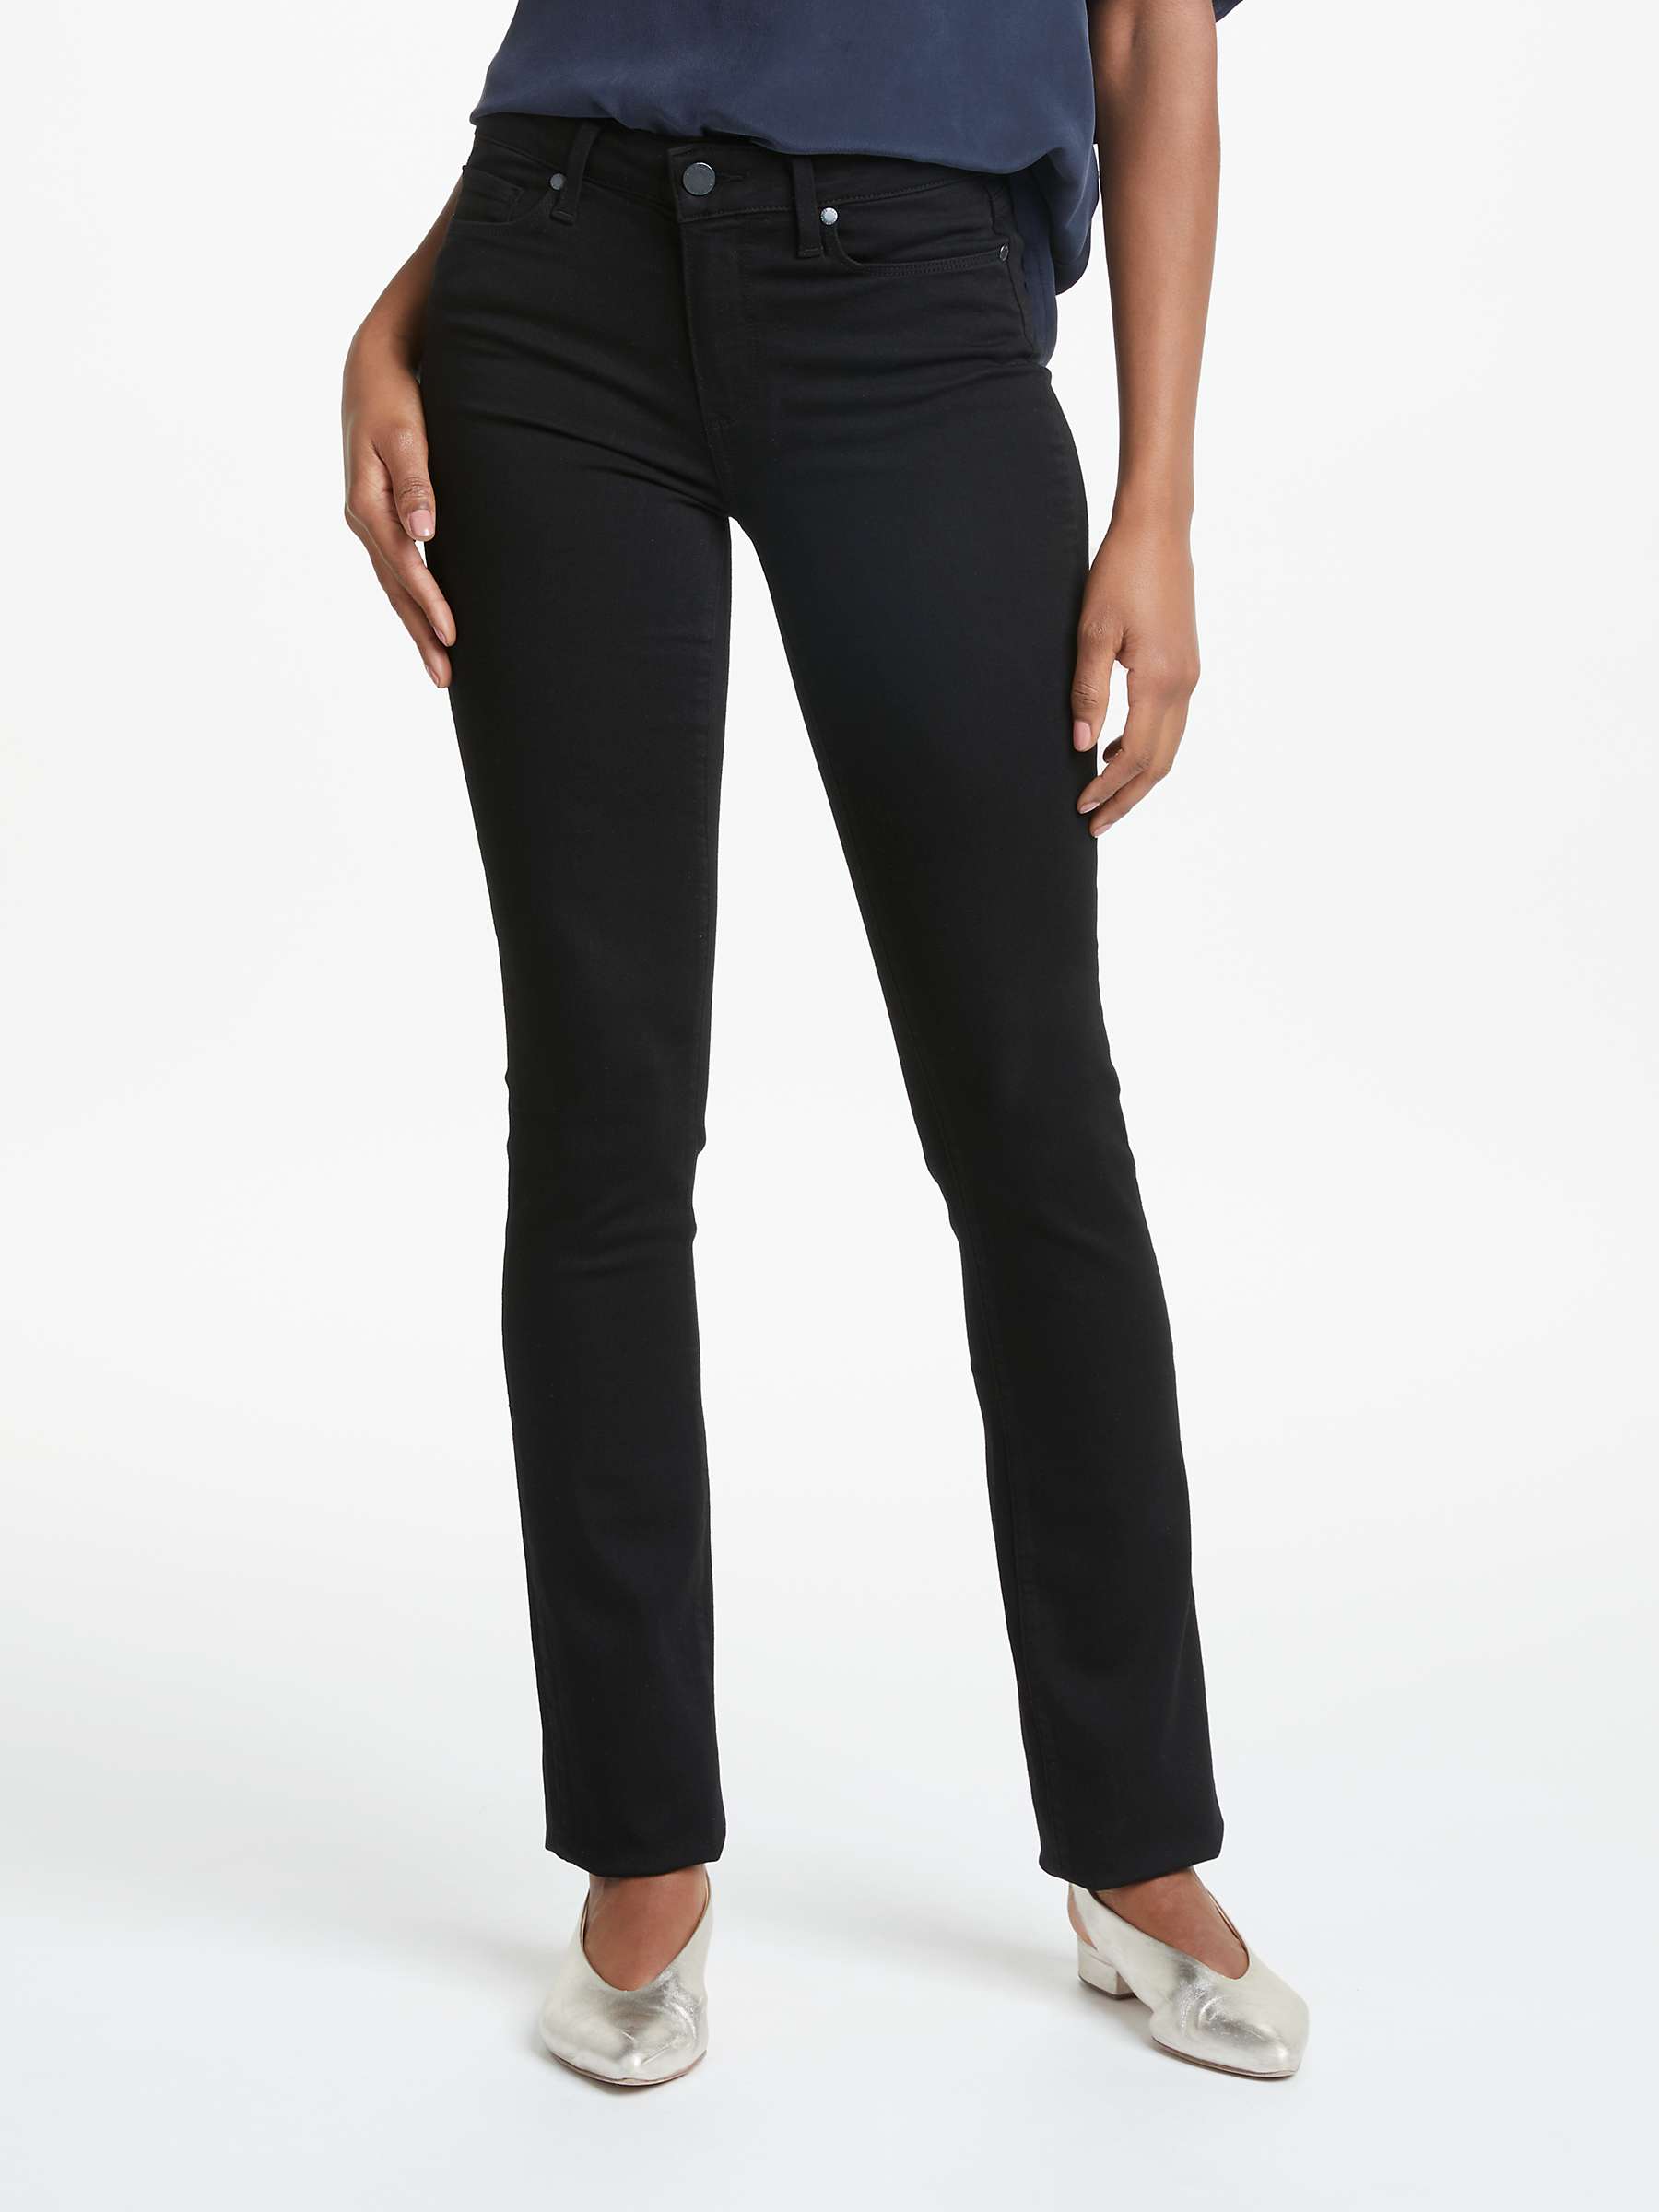 Buy PAIGE Hoxton Straight Leg Jeans, Black Shadow Online at johnlewis.com